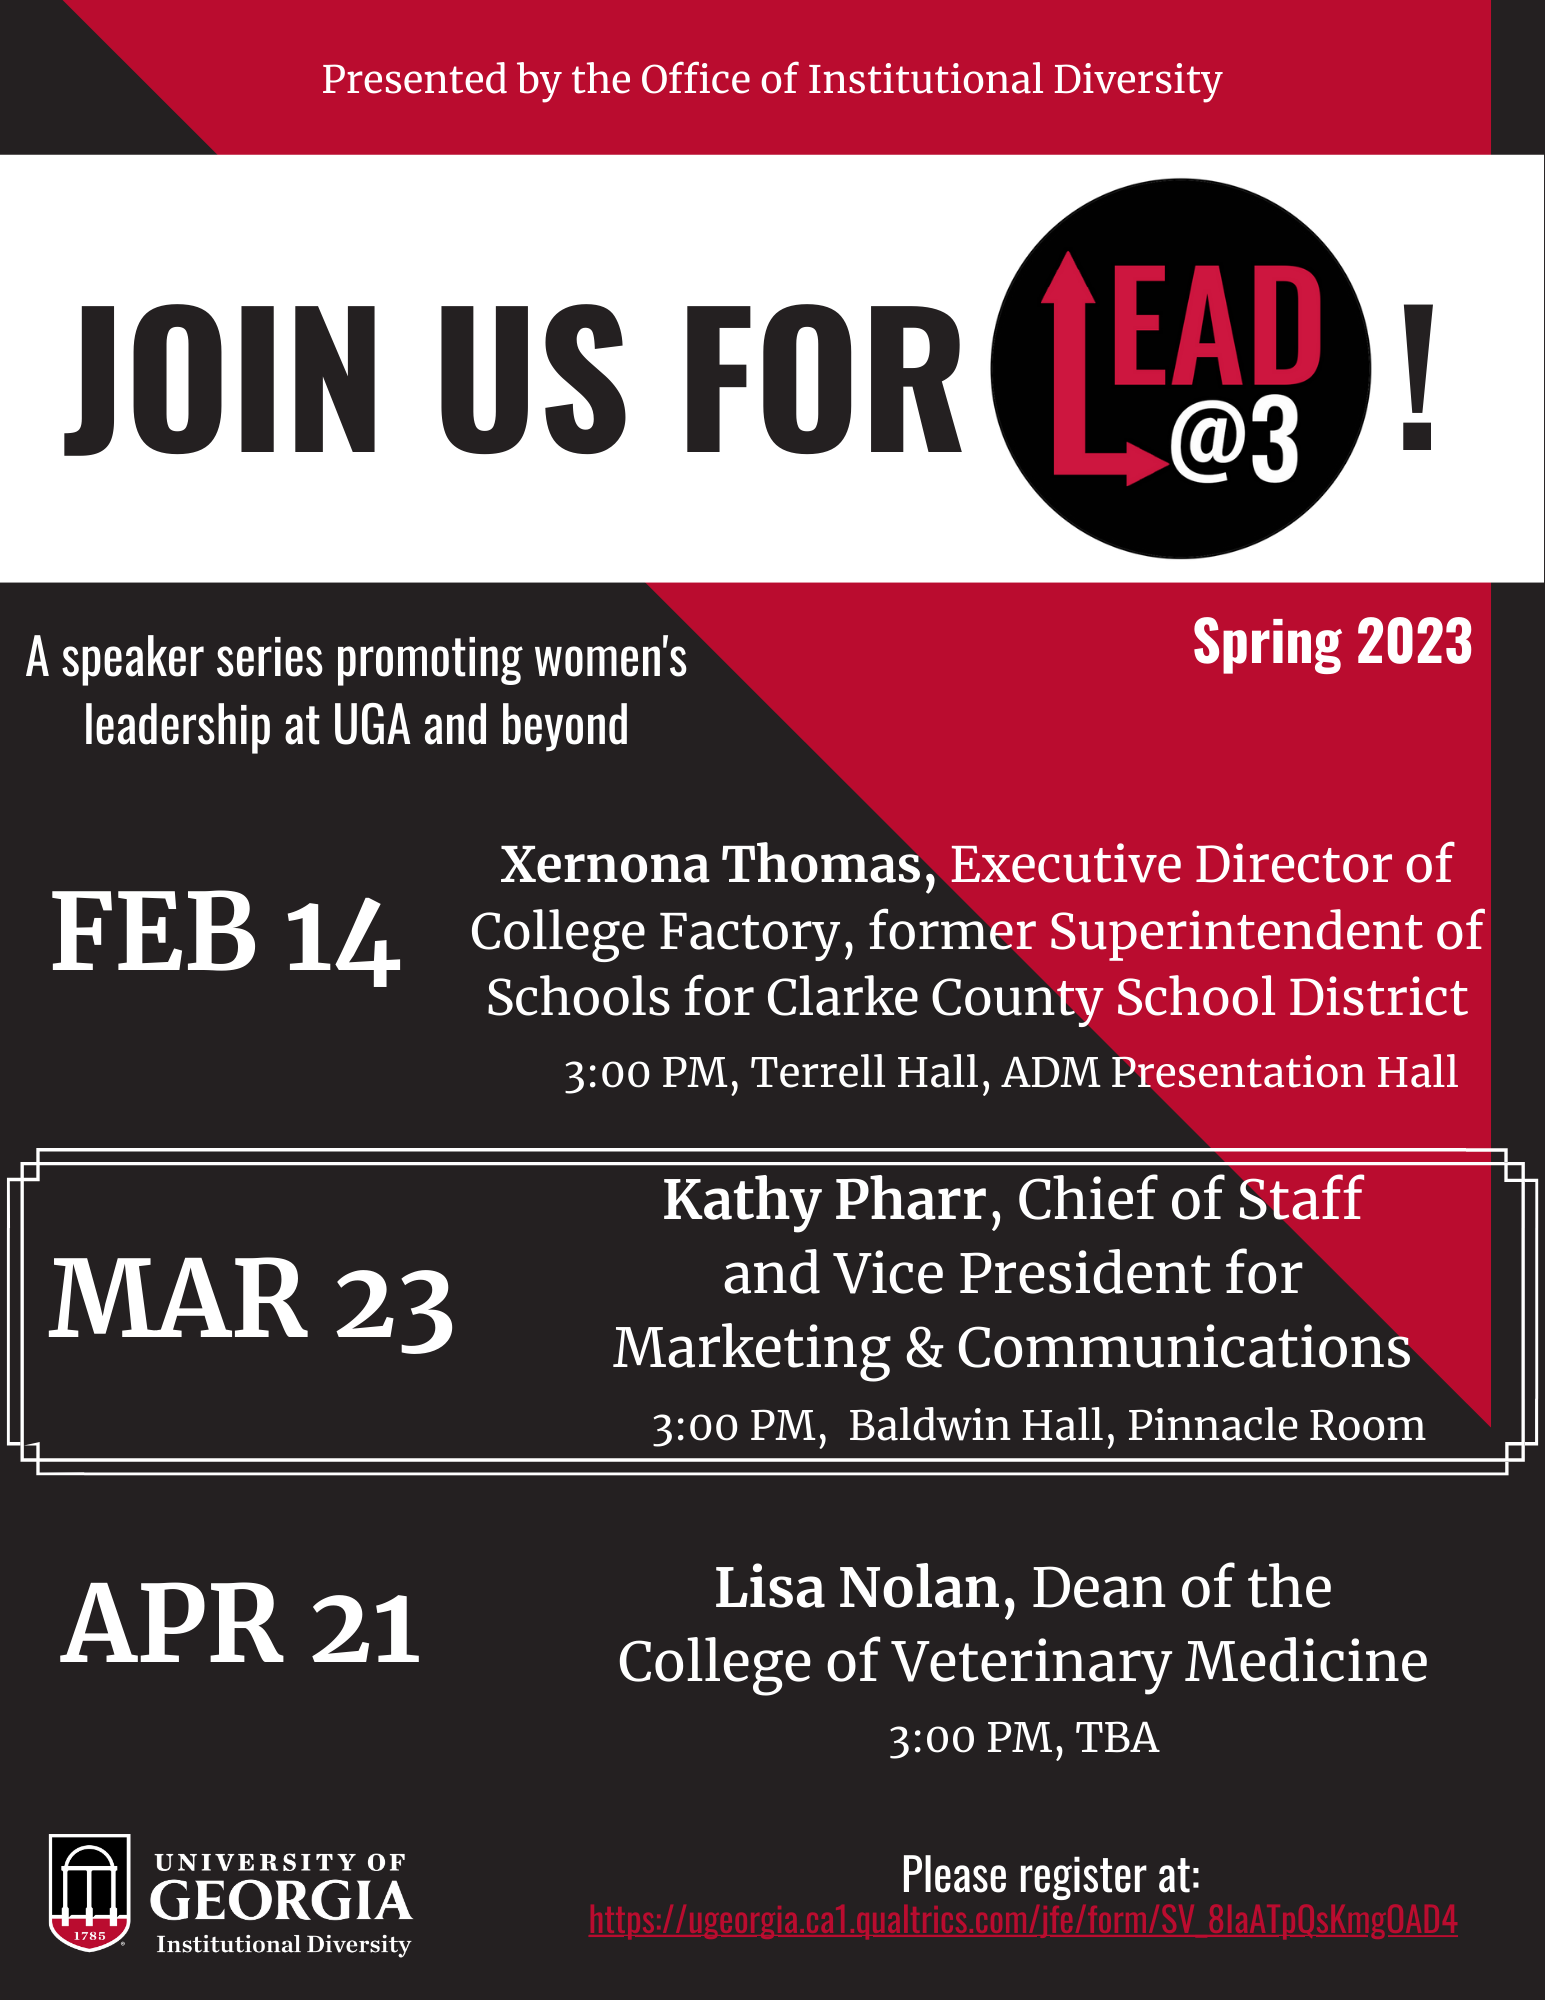 Flyer for the Spring 2023 Lead @ 3 speaker series with information regarding events